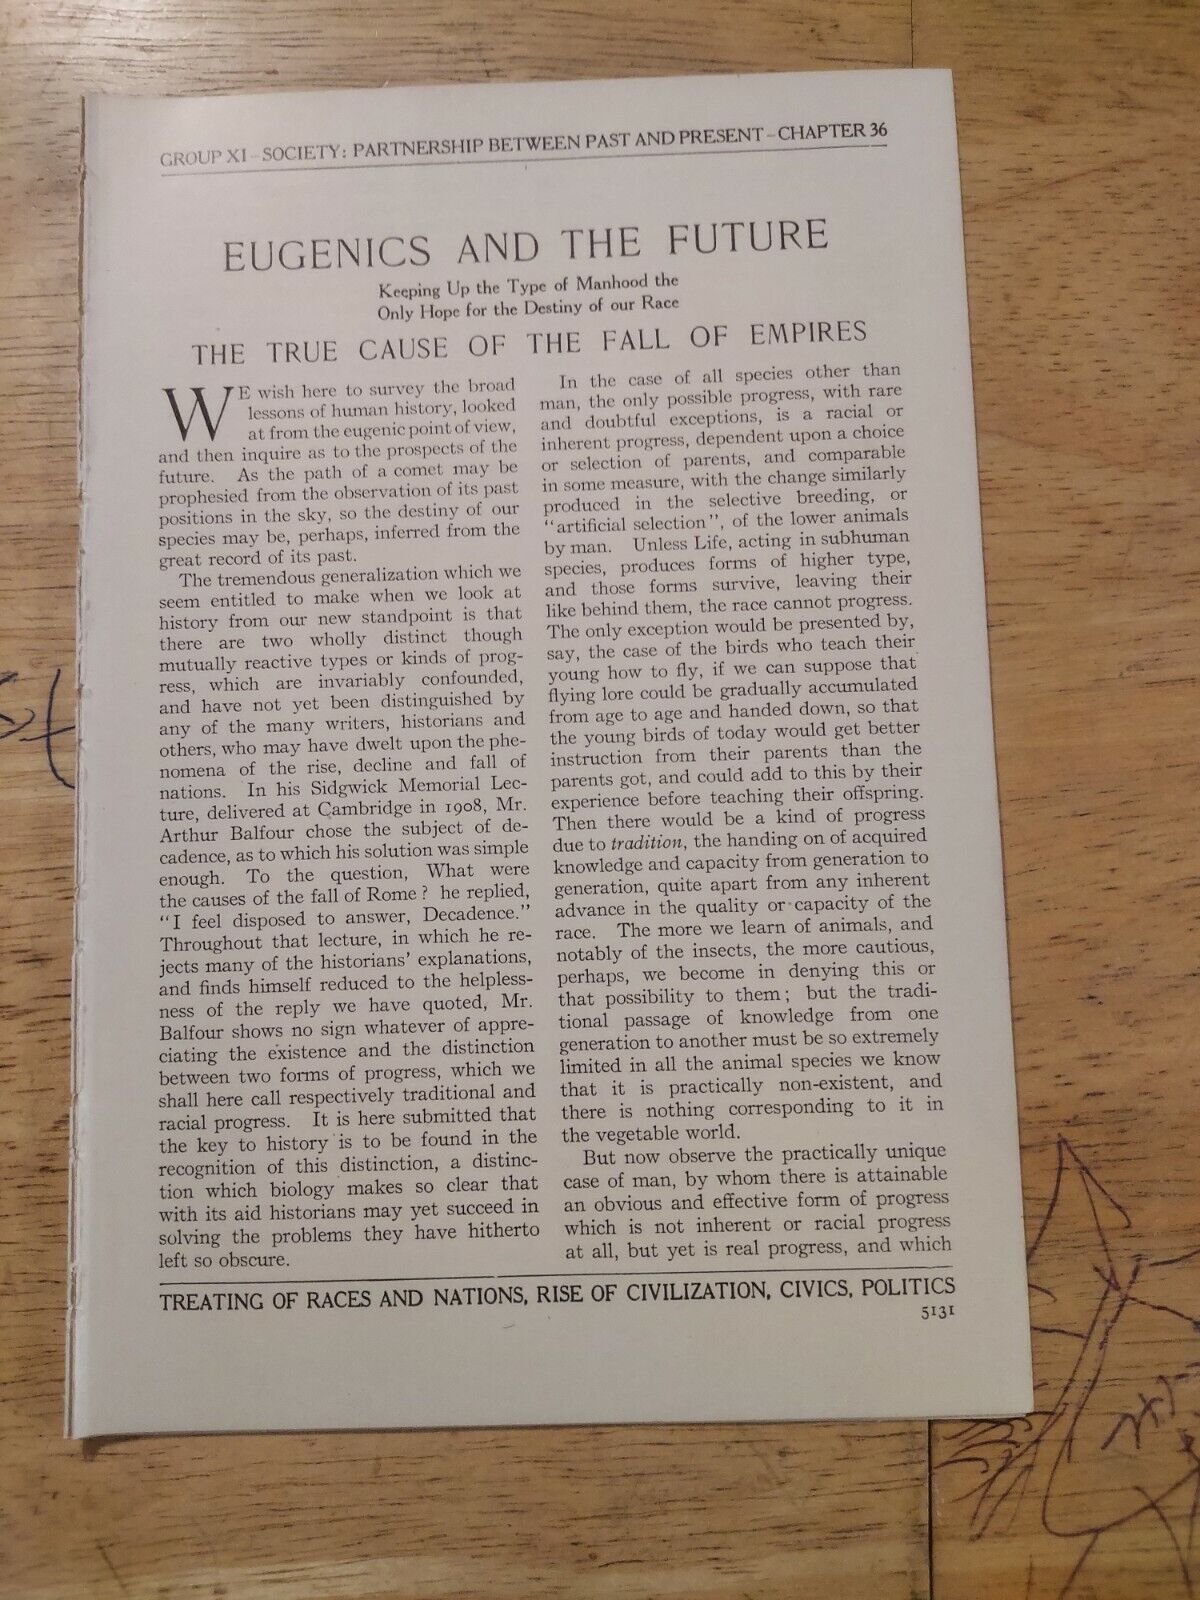 Article-Book of Popular Science-1924-29*-Eugenics-Only hope for destiny our race